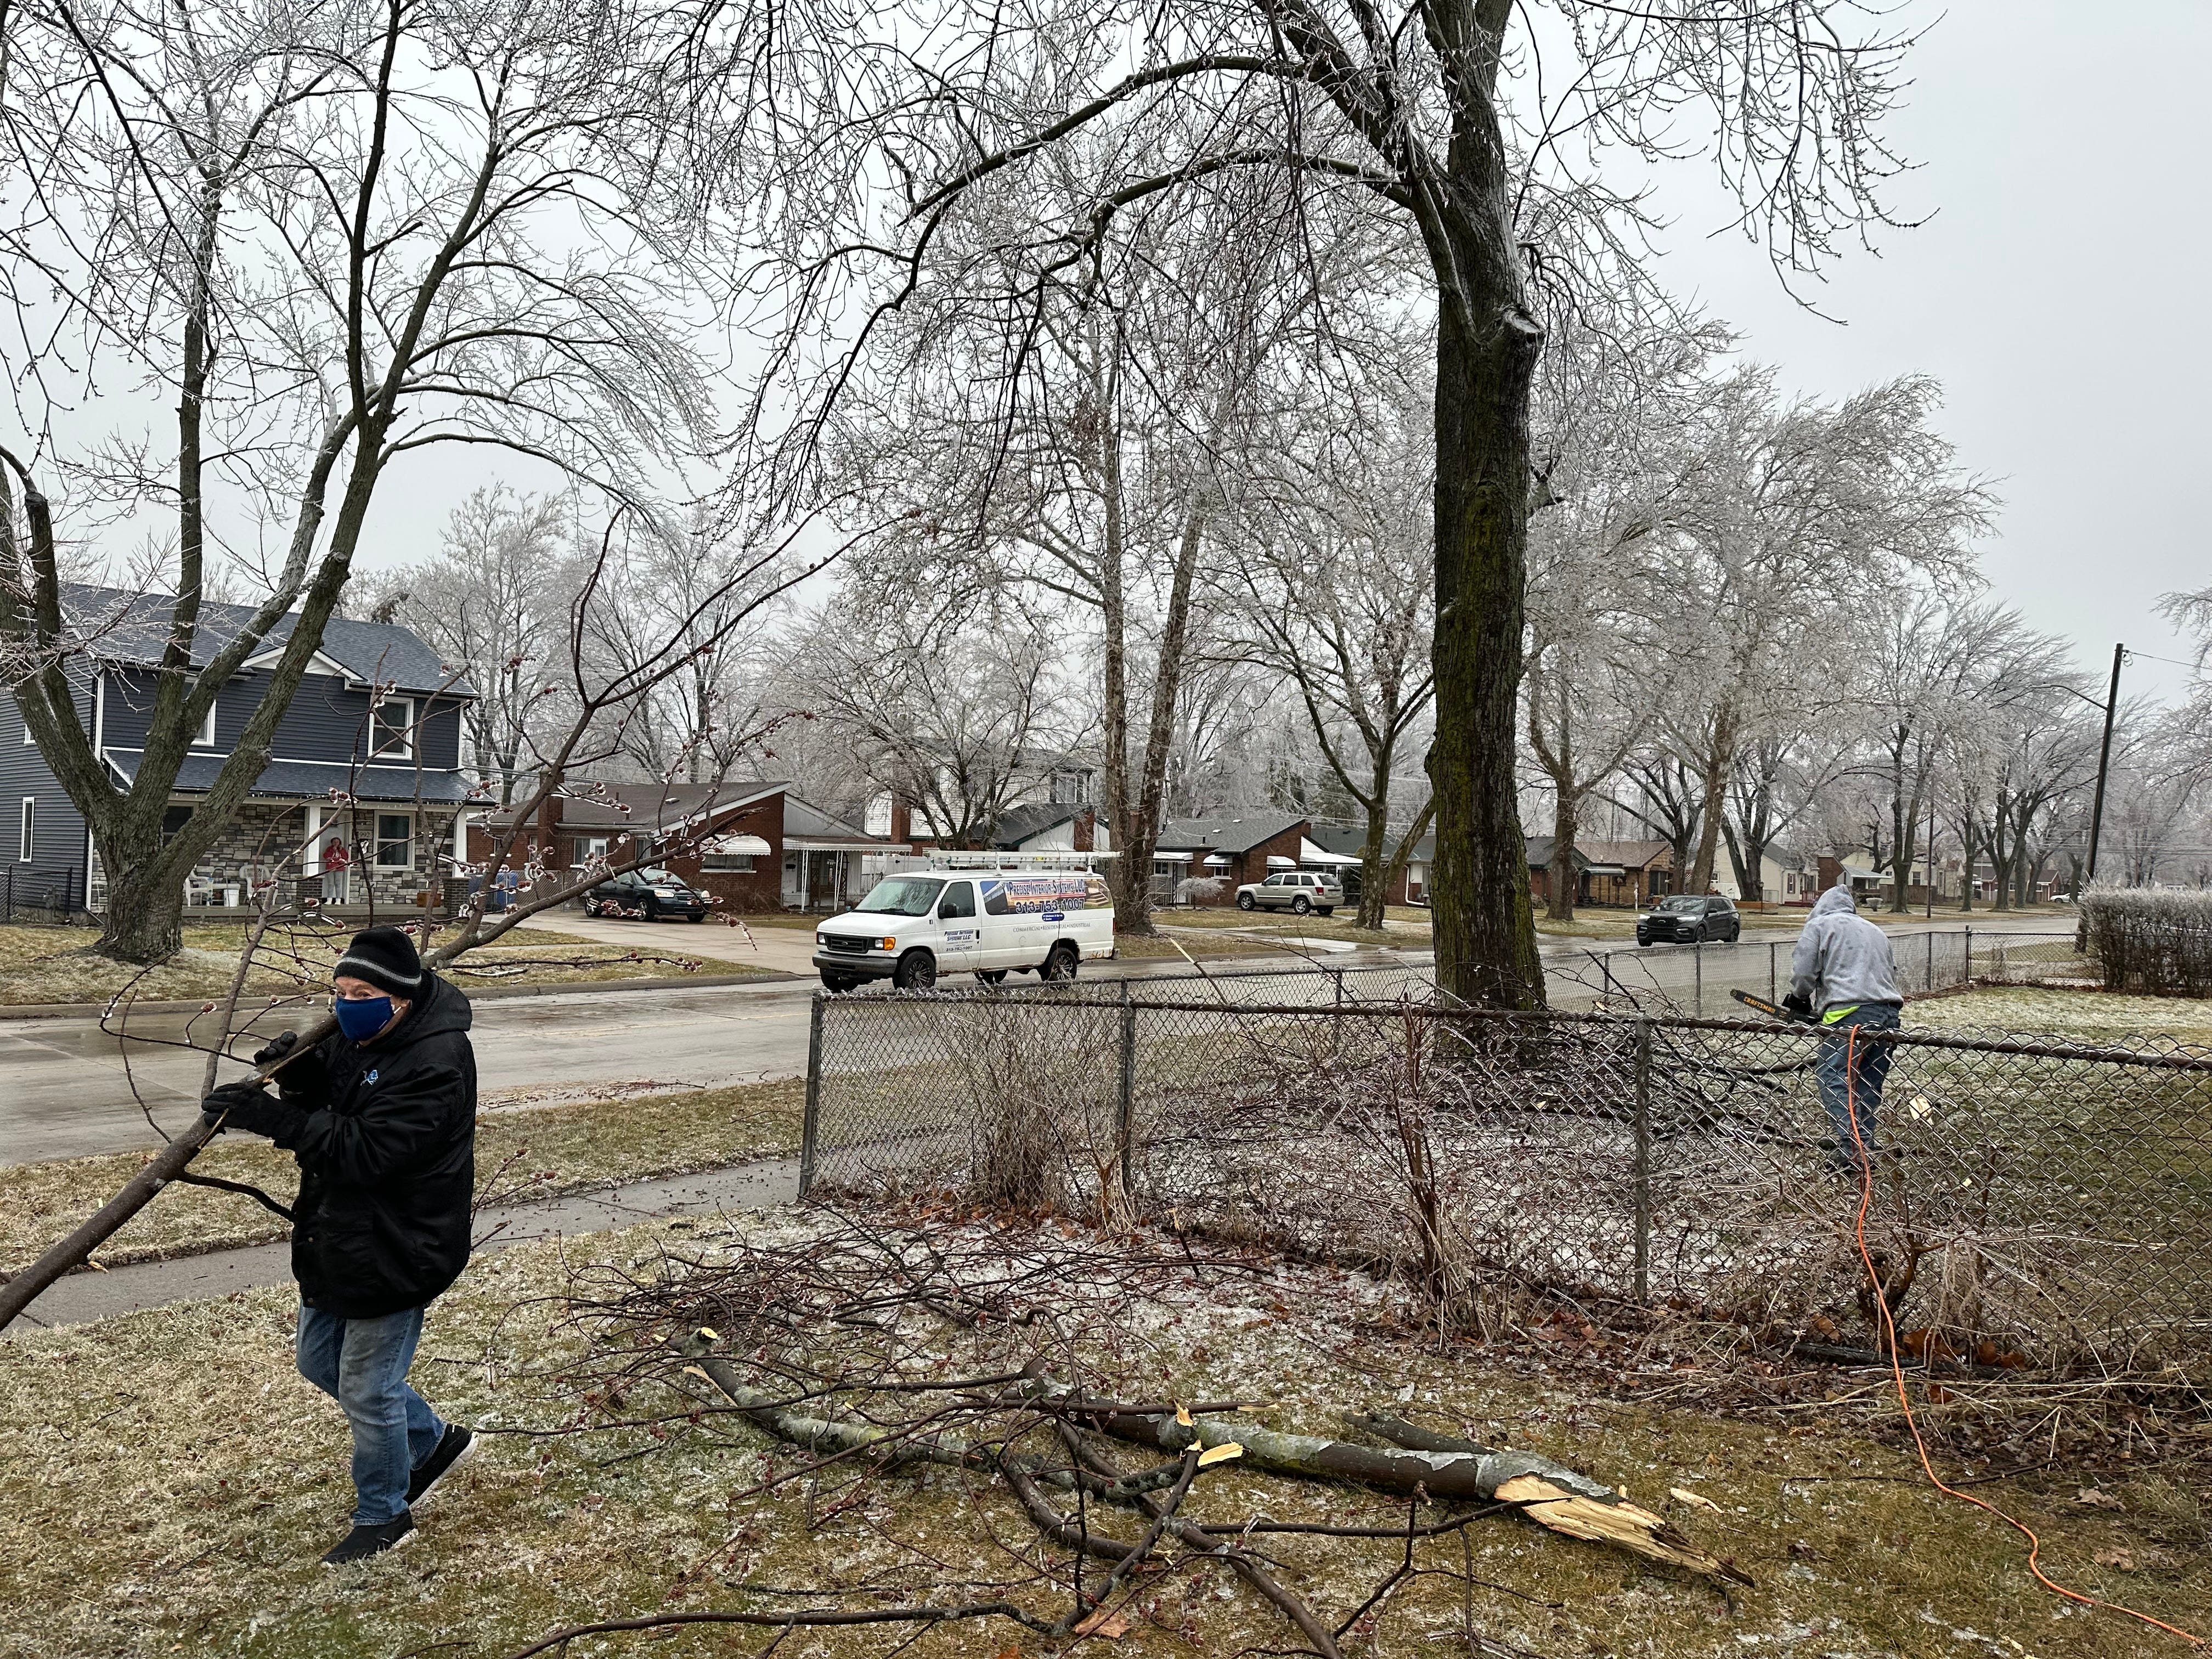 Rich Dennis, 80, carries a fallen branch while cleaning up his yard with the help of a neighbor after heavy ice downed several branches in his Dearborn neighborhood.